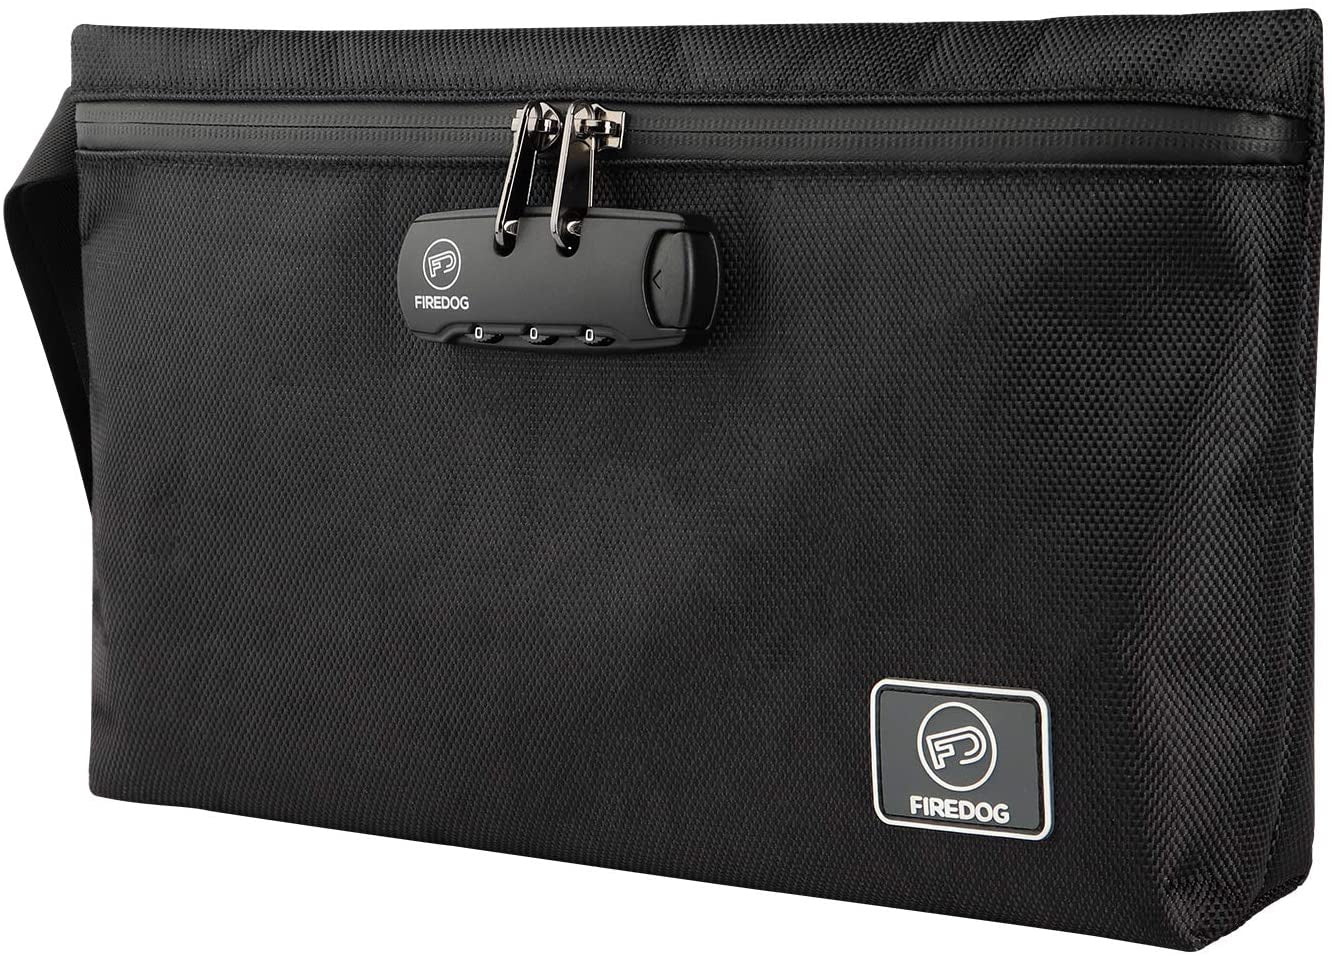 Large Smell Proof Storage Bag with Combination Lock and Hand Strap (MSRP: $19.99)